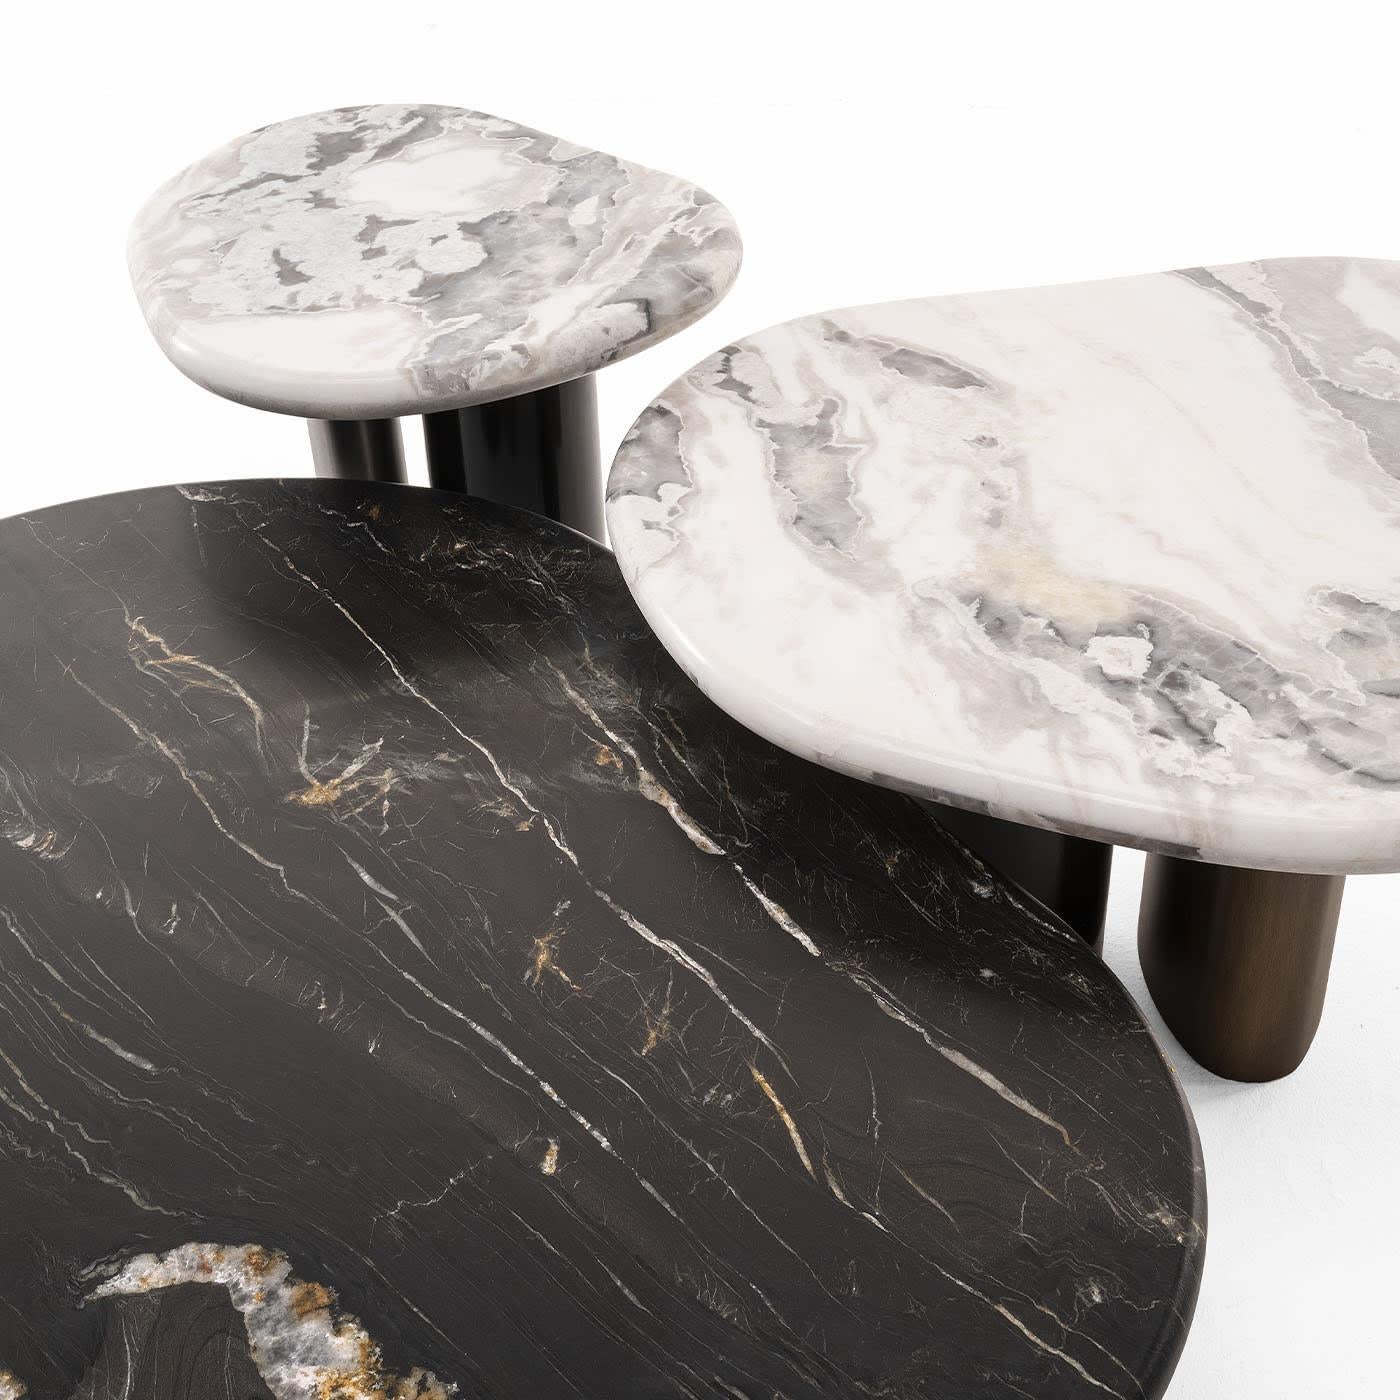 A sculptural silhouette enhanced by superbly contrasting finishes lends this side table its captivating charm. The prized Dover marble top captures the eye with its singular veins and cloud-inspired contours, while the couple of oval-cut and